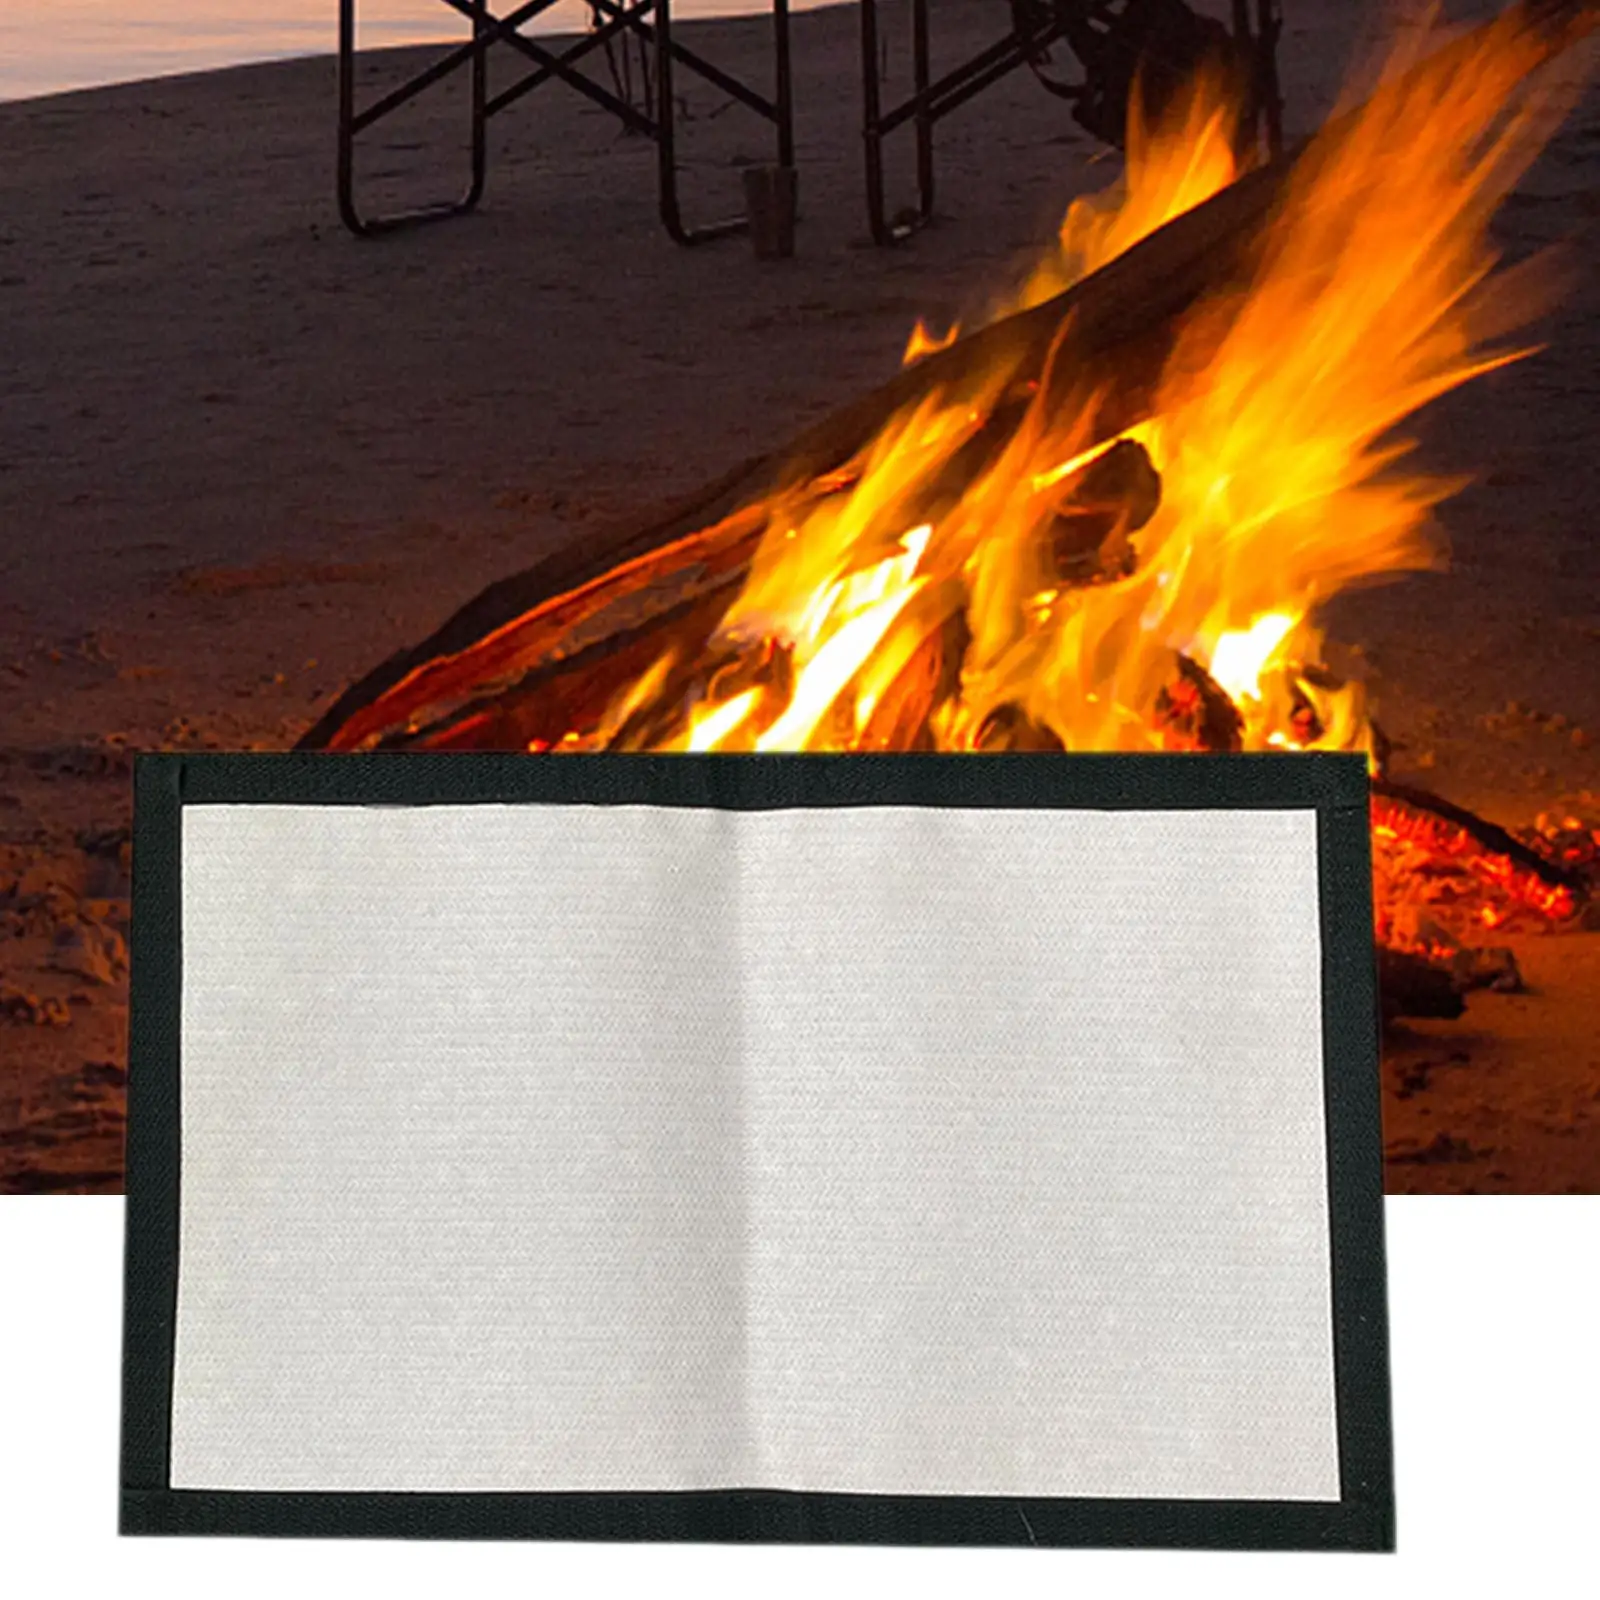 

Fire Pit Pad Flame Retardant Rectangle Supplies BBQ Protective Wood Burning 33x21cm Camping Ember Mat Fire Pit Blanket Grill Mat